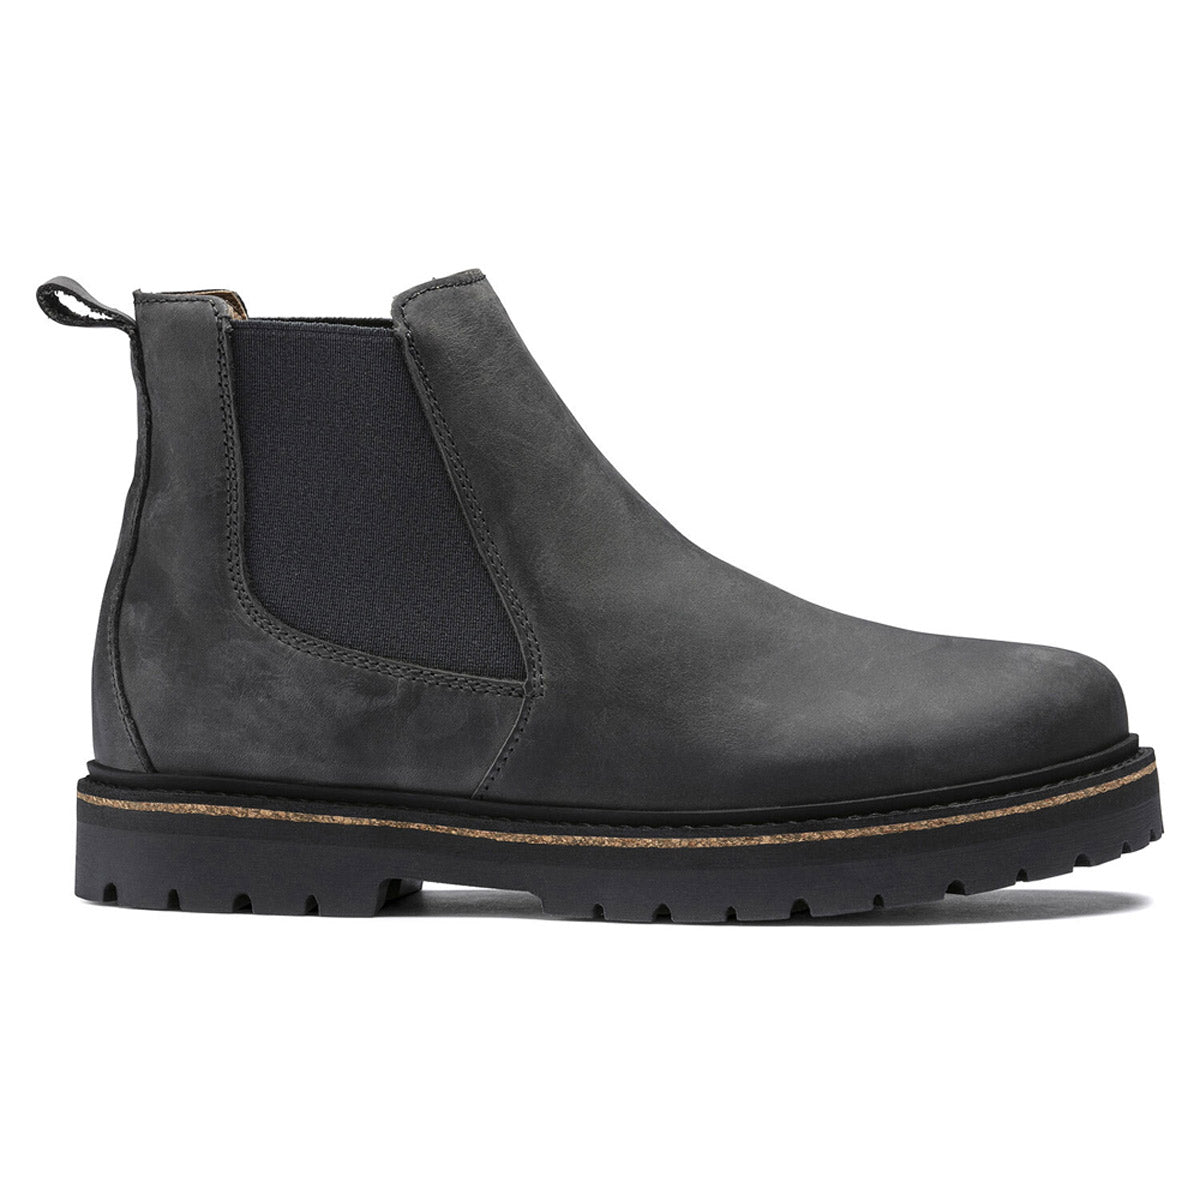 A single Birkenstock Stalon Graphite Nubuck - Womens leather Chelsea boot with elastic side panels, a cork-latex footbed, and a chunky sole.